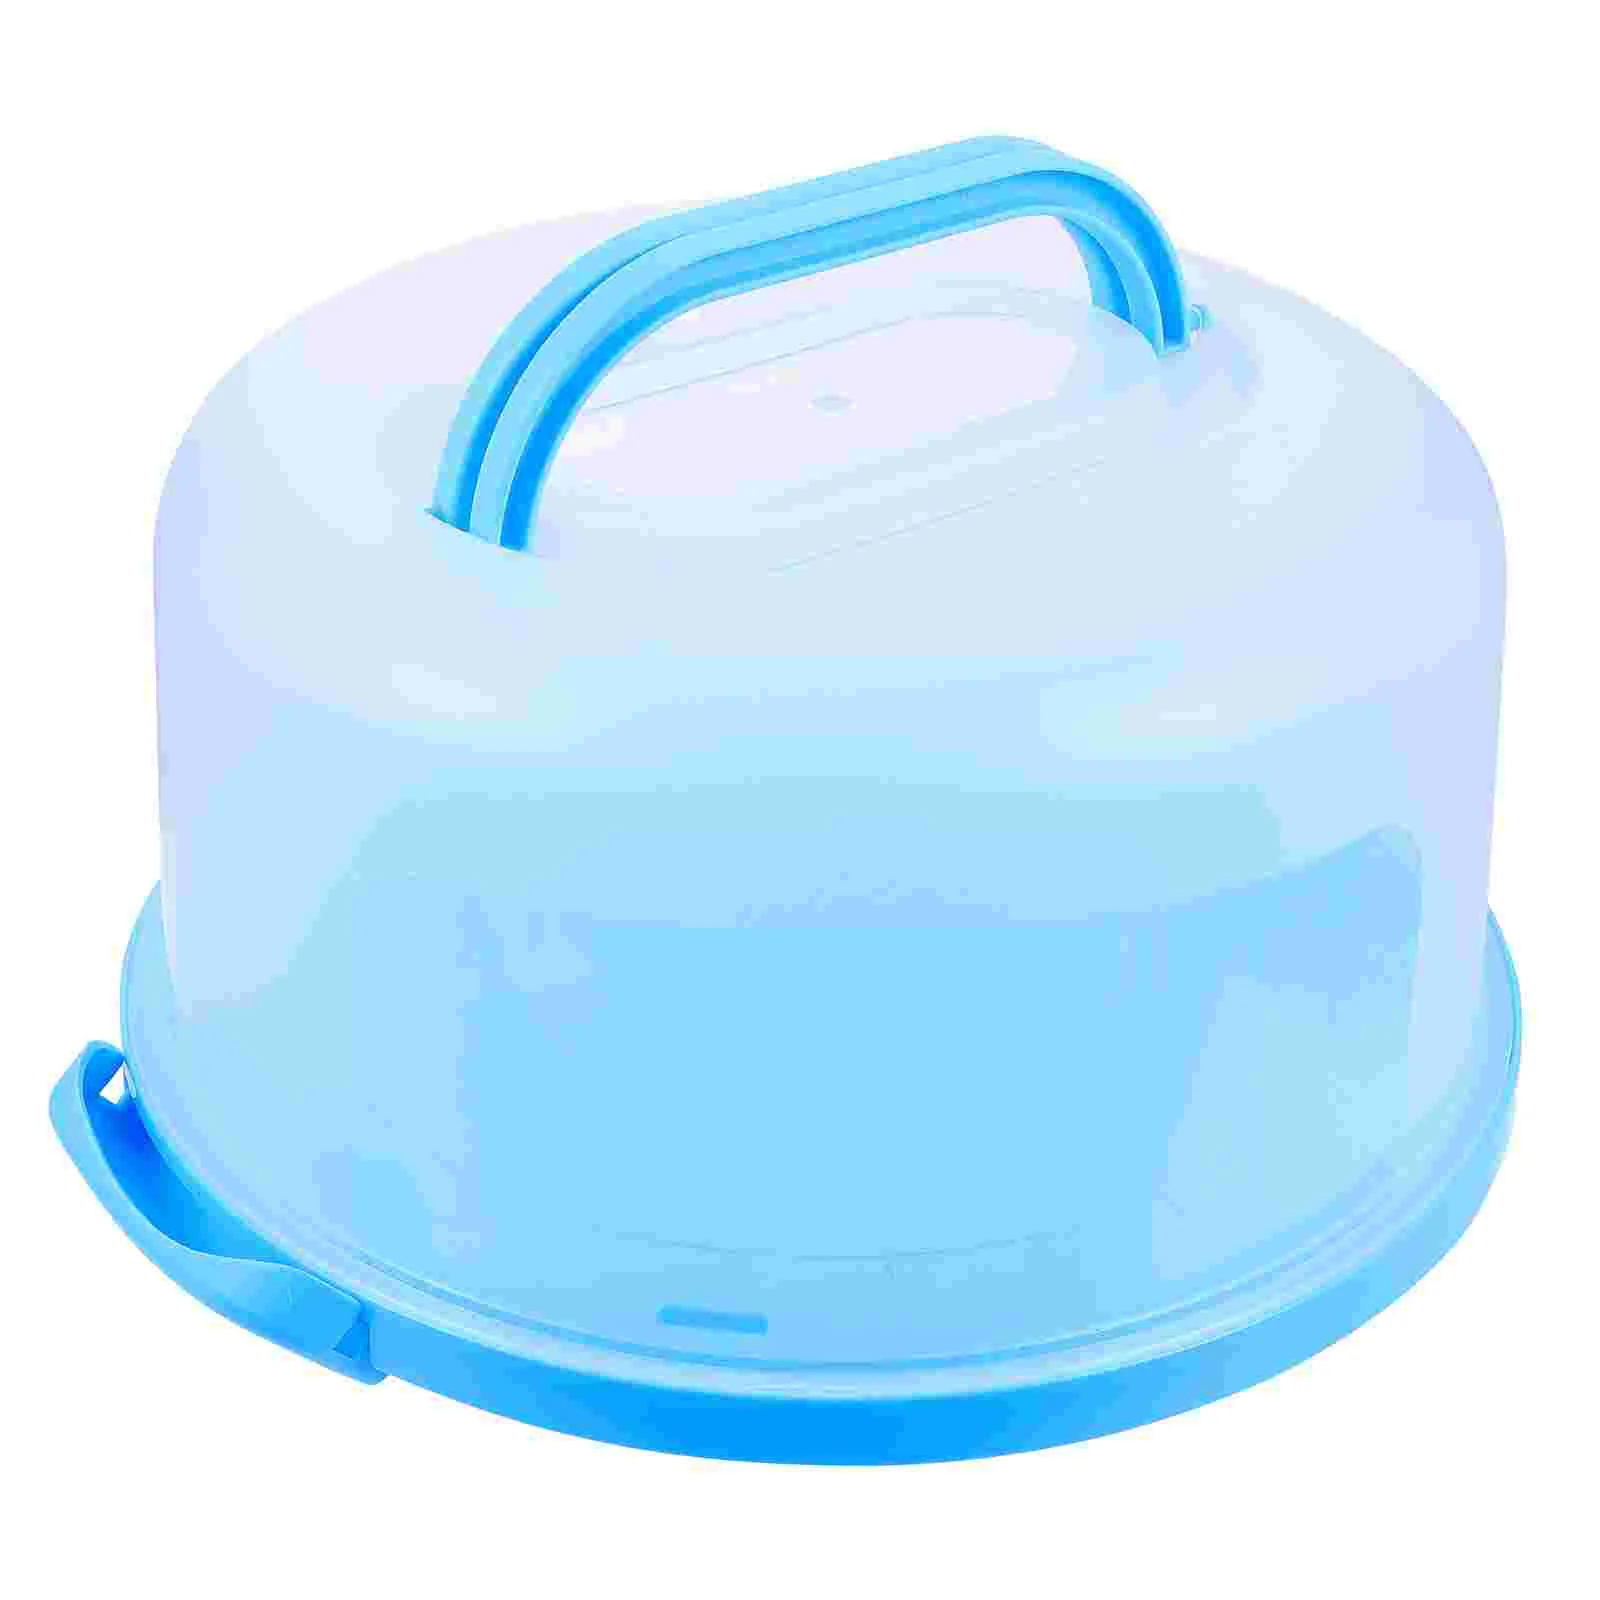 

Cake Carrier Plasticholder Box Boxes Container Lid Cupcake Portable Handle Wedding Moon Containers Server Keeper Storage Dome